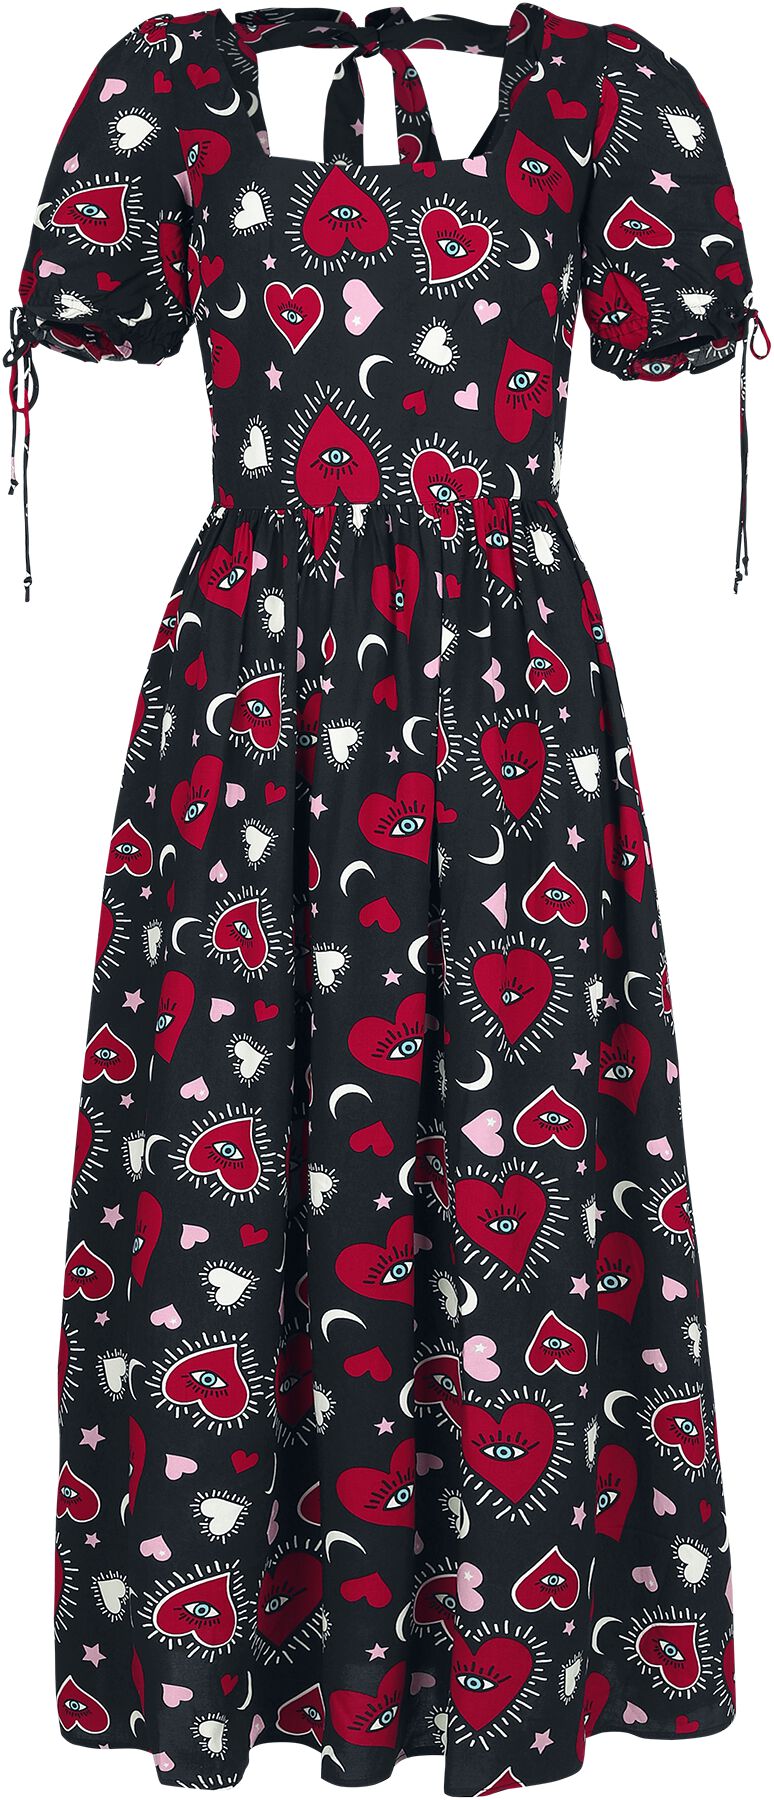 Image of Abito lungo di Hell Bunny - Kate heart dress - XS a 4XL - Donna - nero/rosso